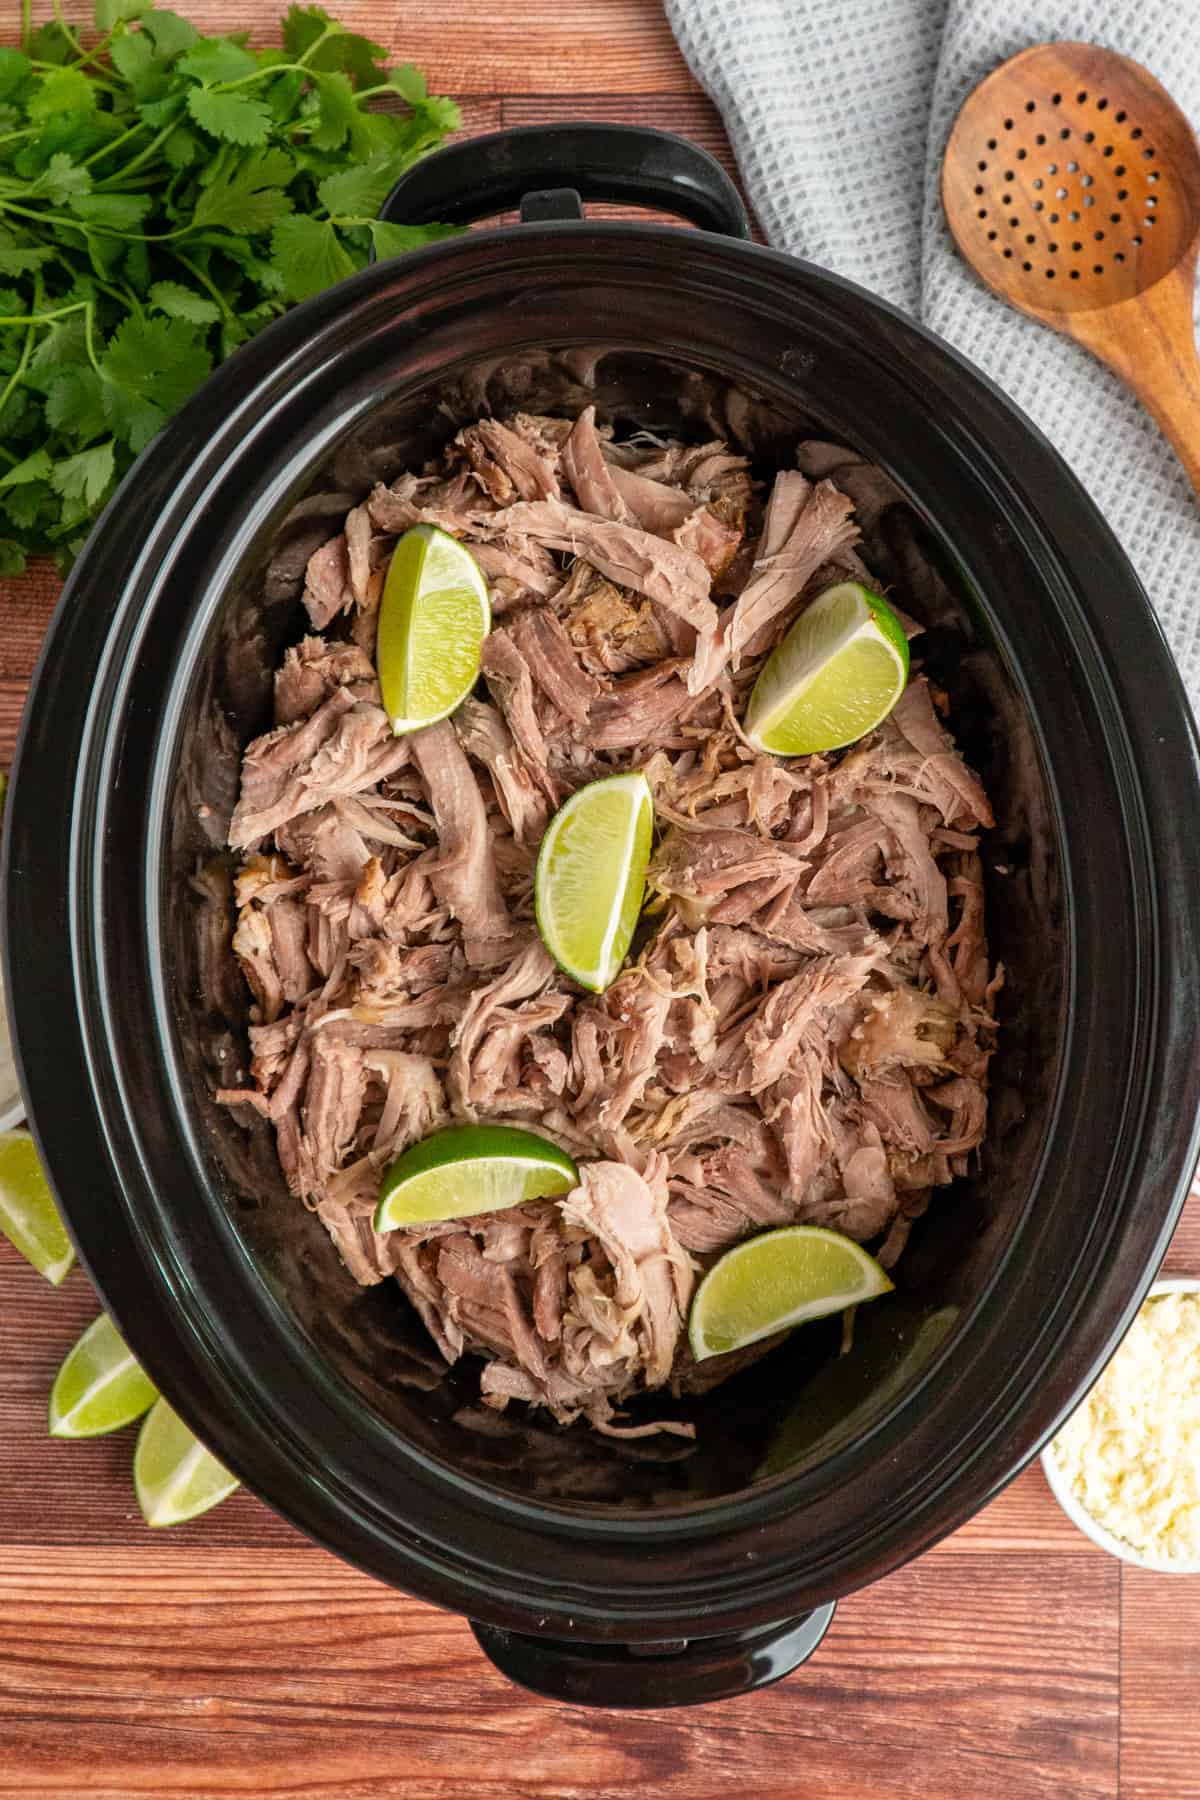 Pork carnitas in a slow cooker garnished with limes.